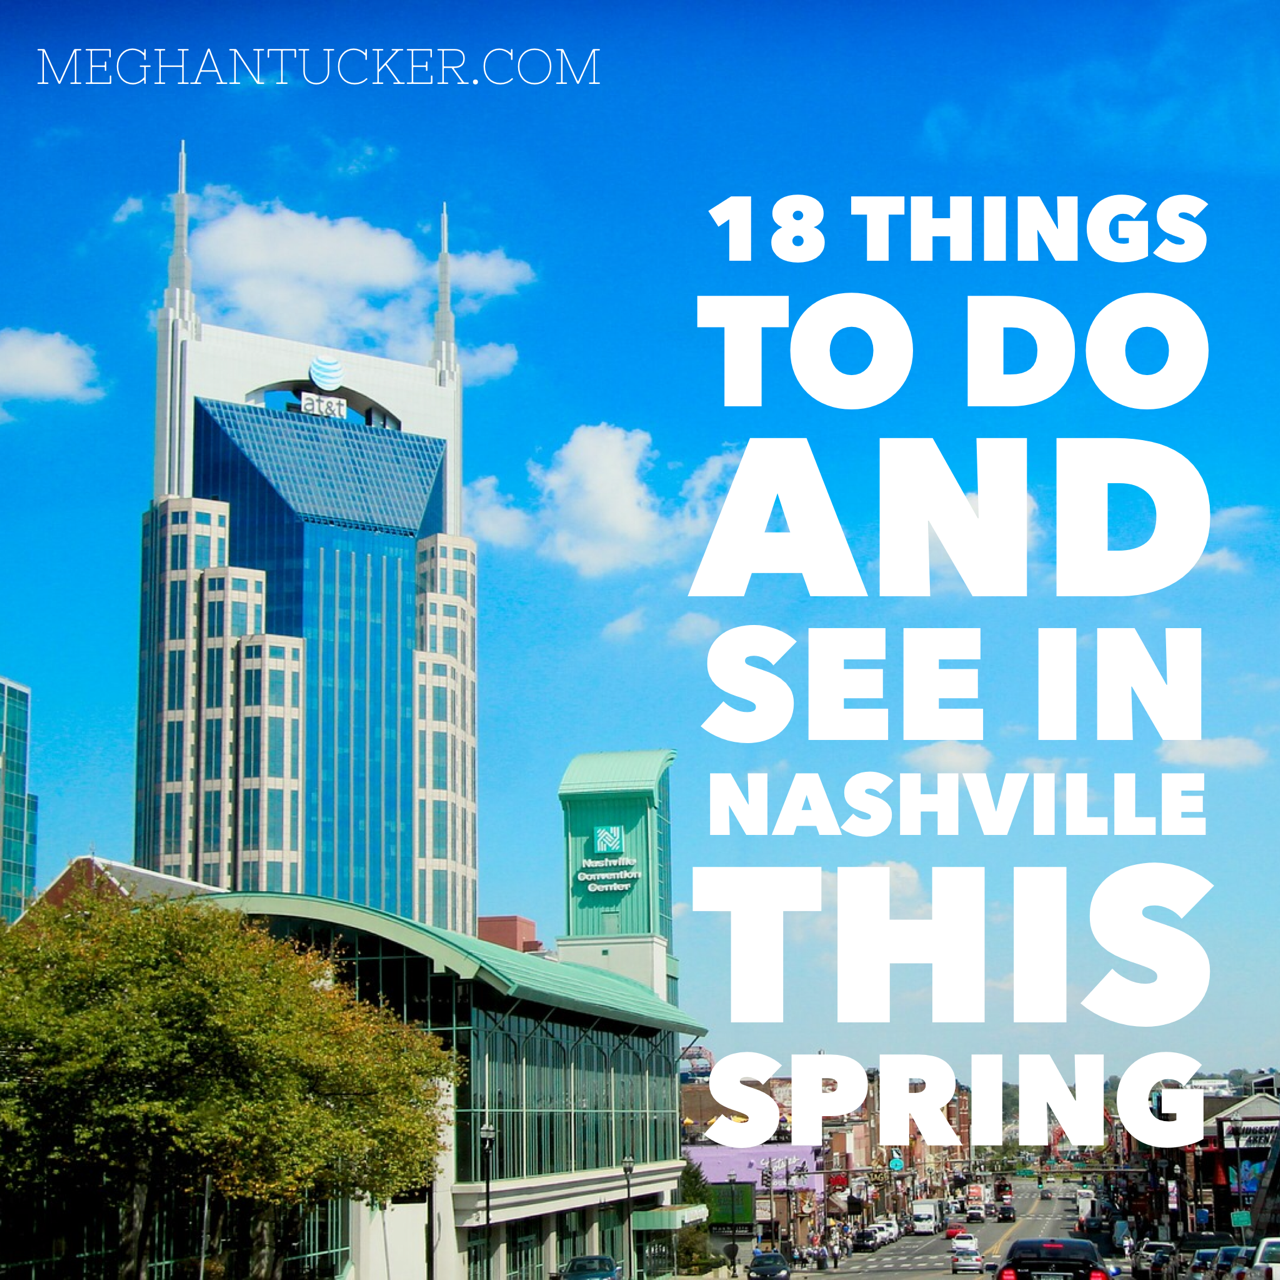 18 Things to Do in Nashville This Spring